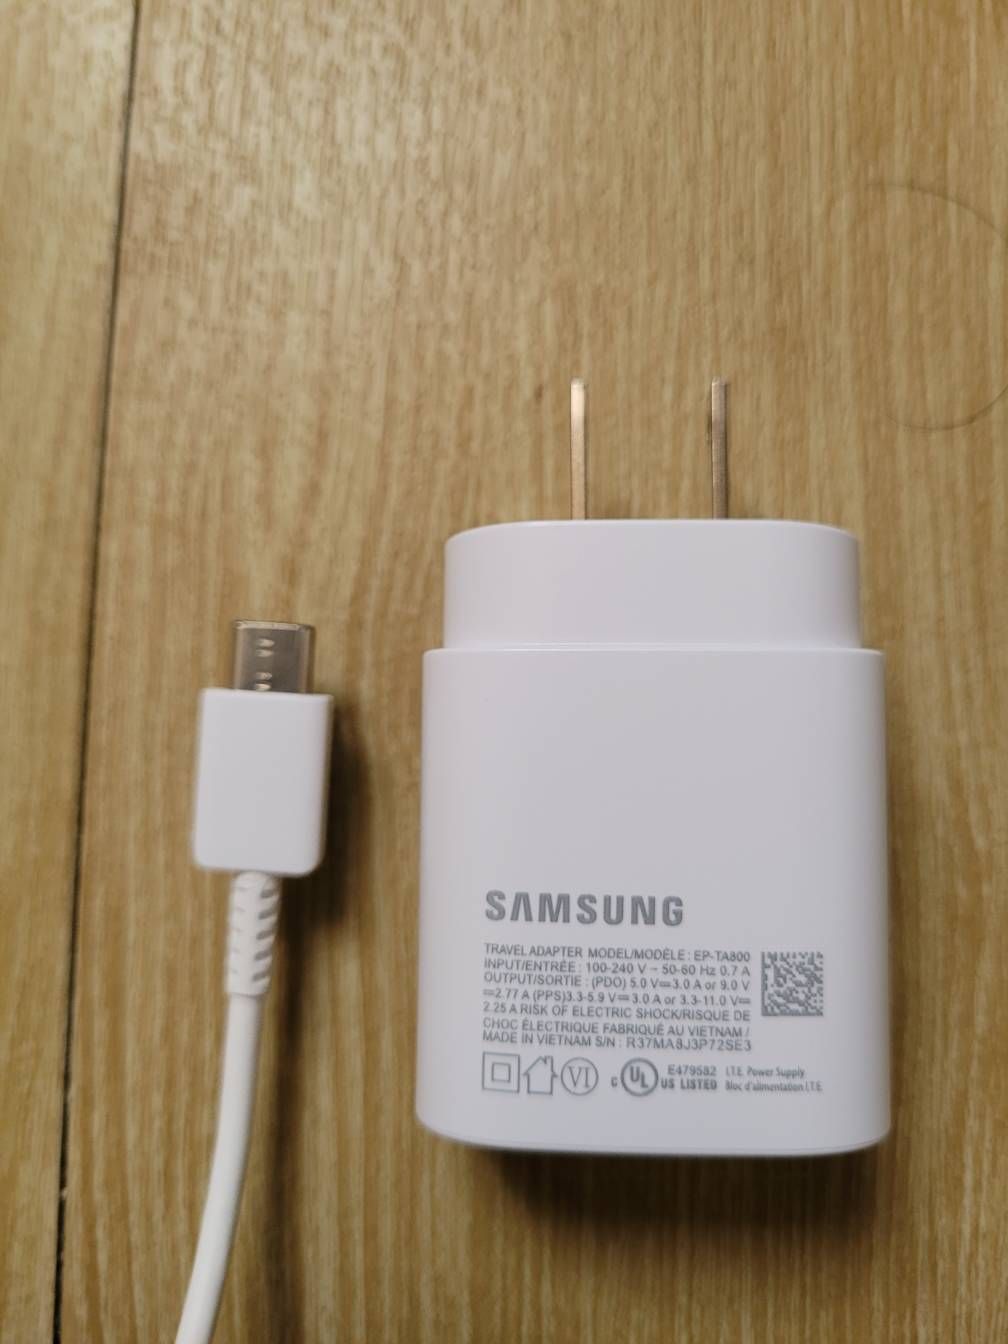 Authentic or fake Samsung 25W charger? - Samsung Members